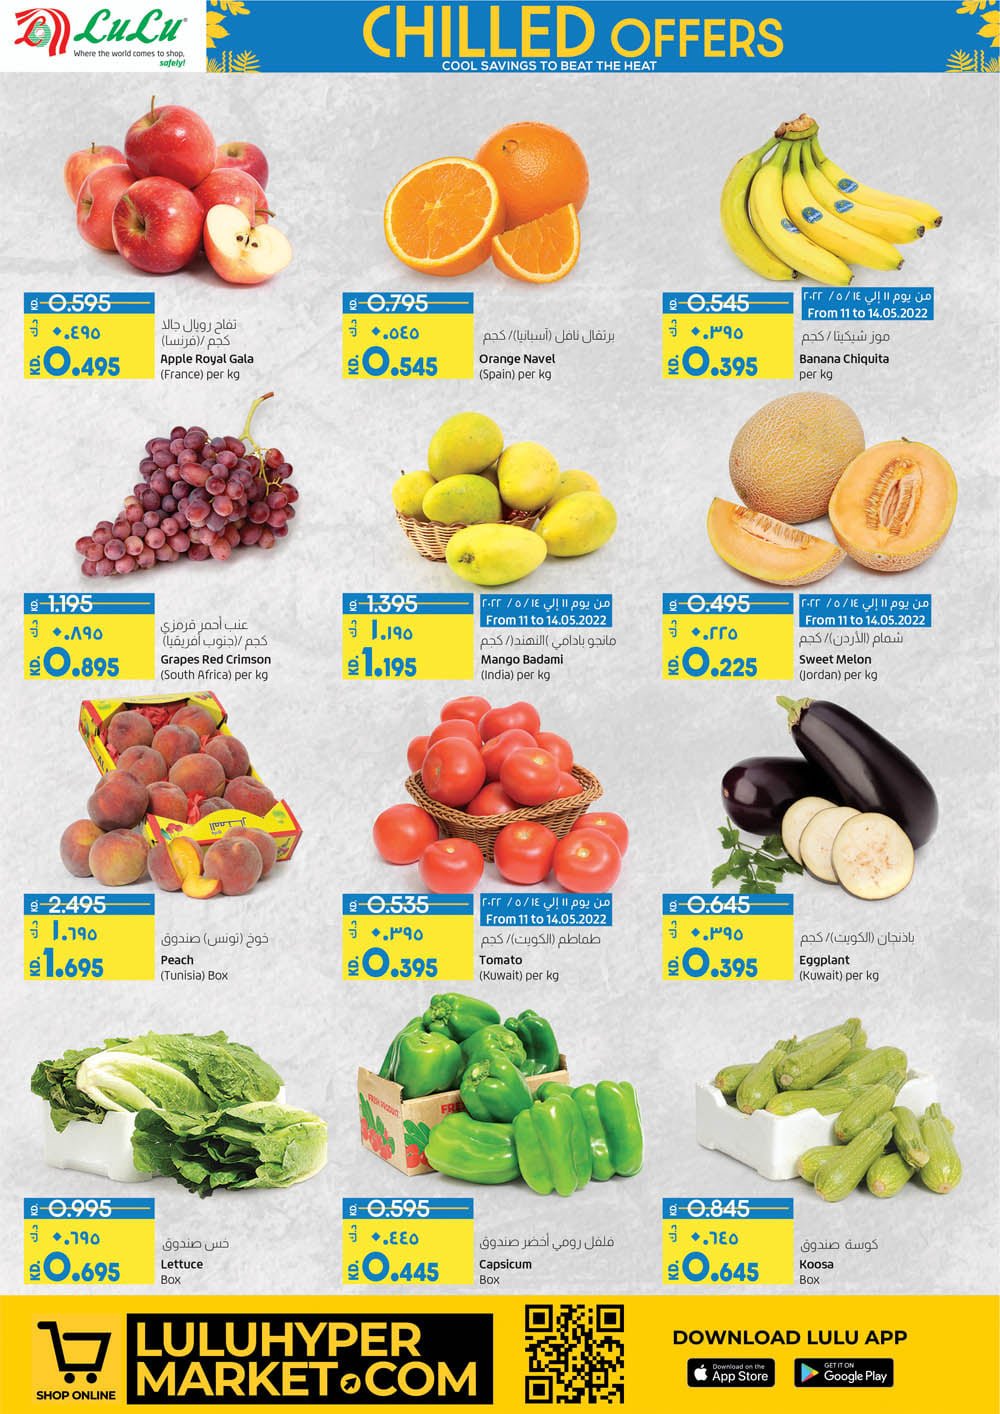 Lulu Hypermarket Chilled Offers, iiQ8 weekly promotions 3